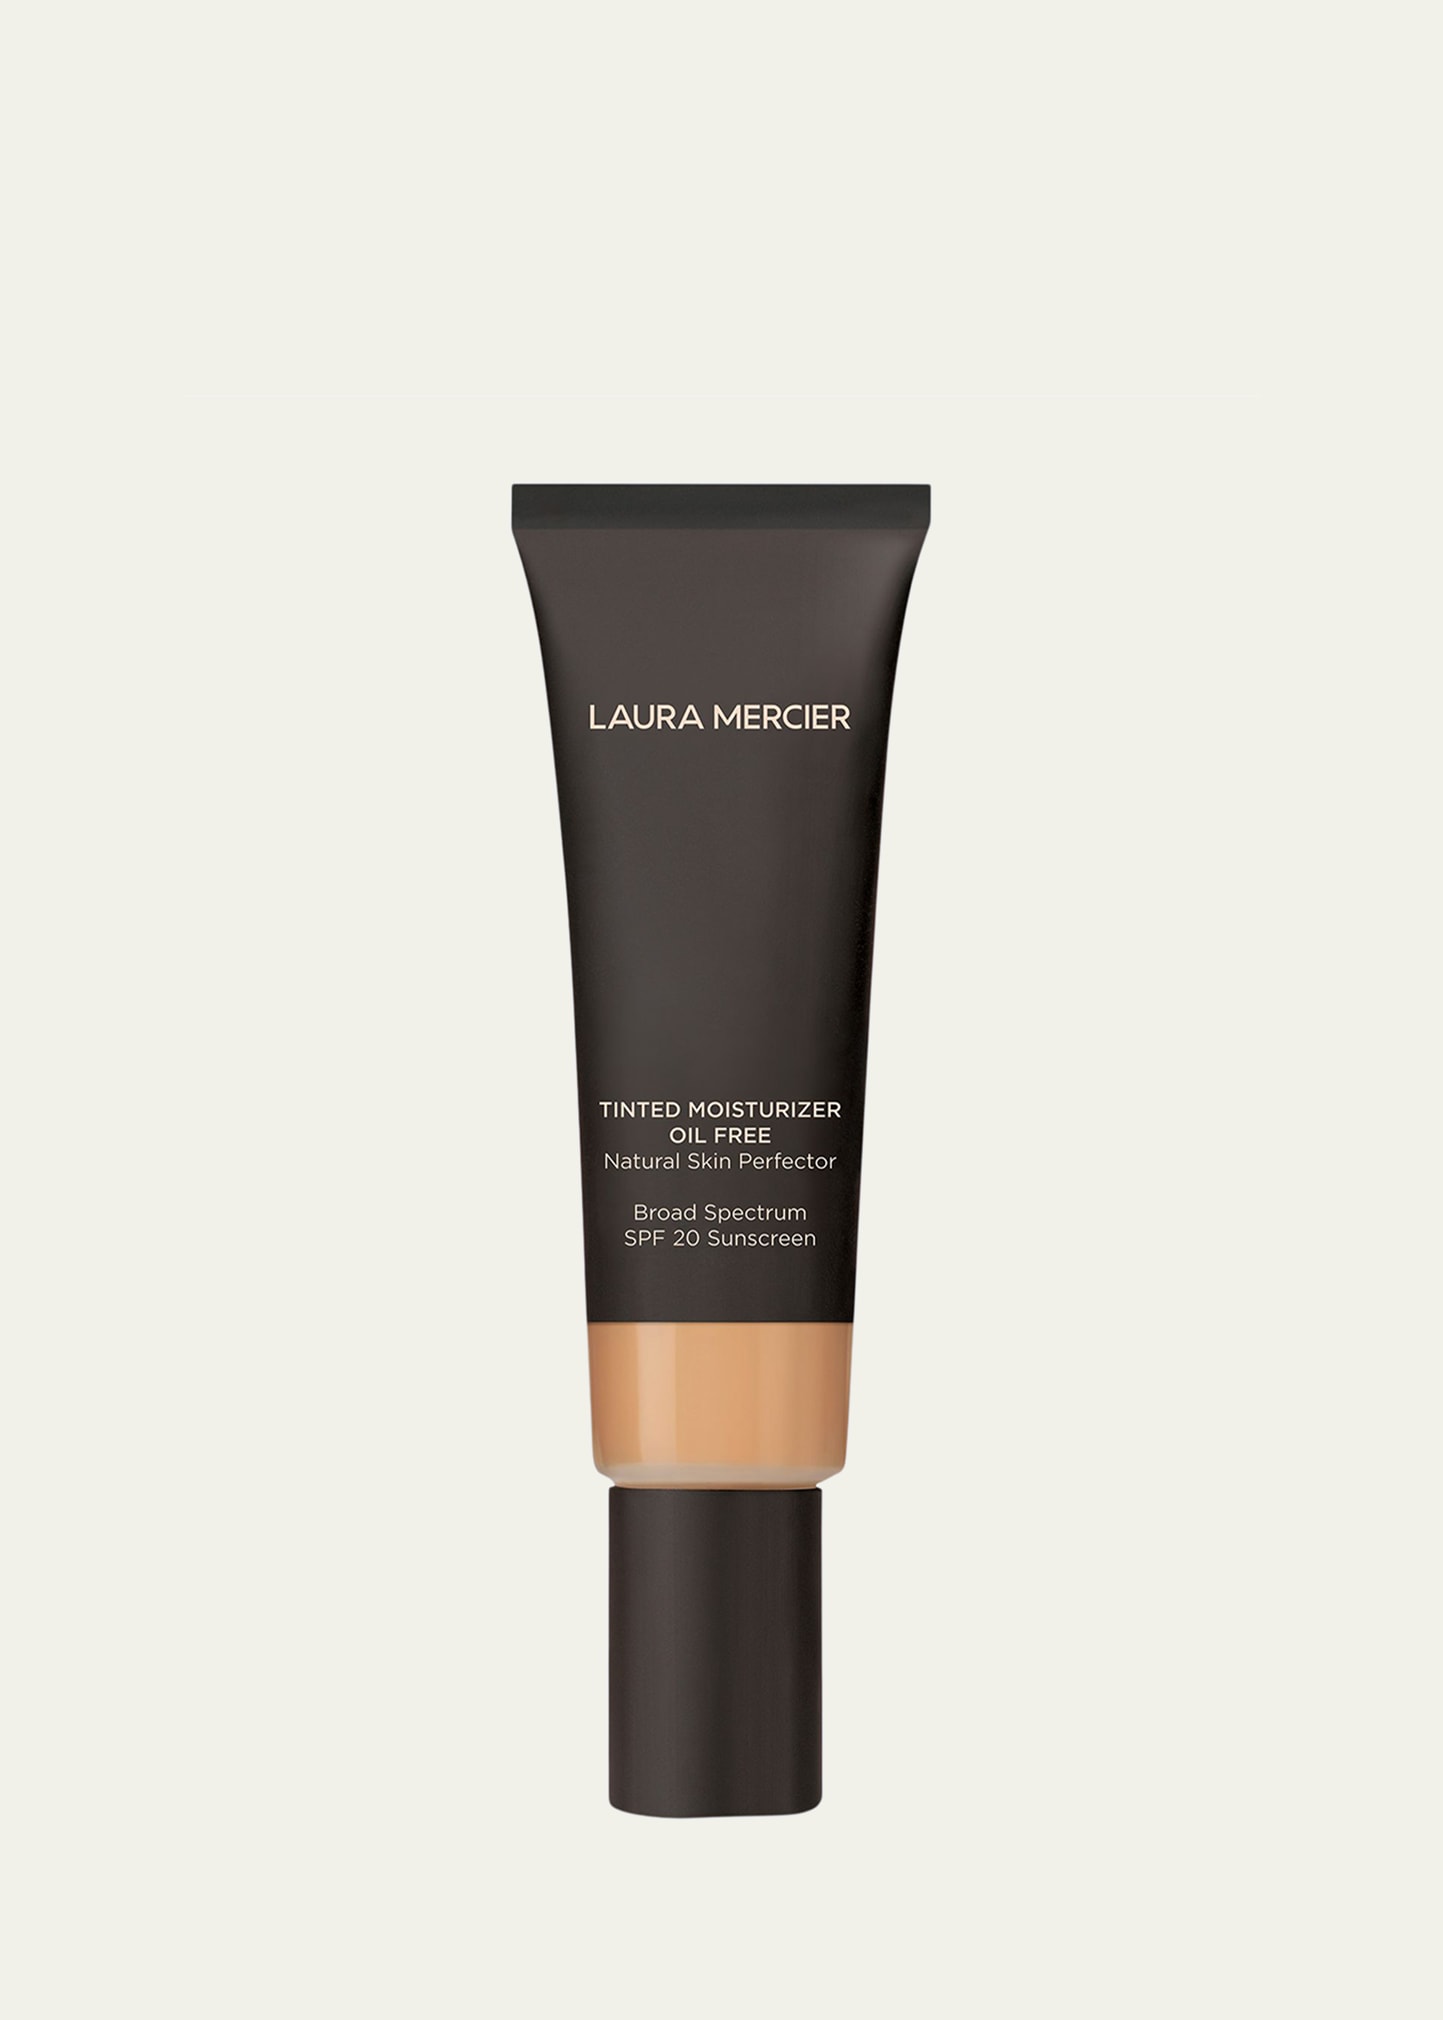 Tinted Moisturizer Oil-Free Natural Skin Perfector SPF 20